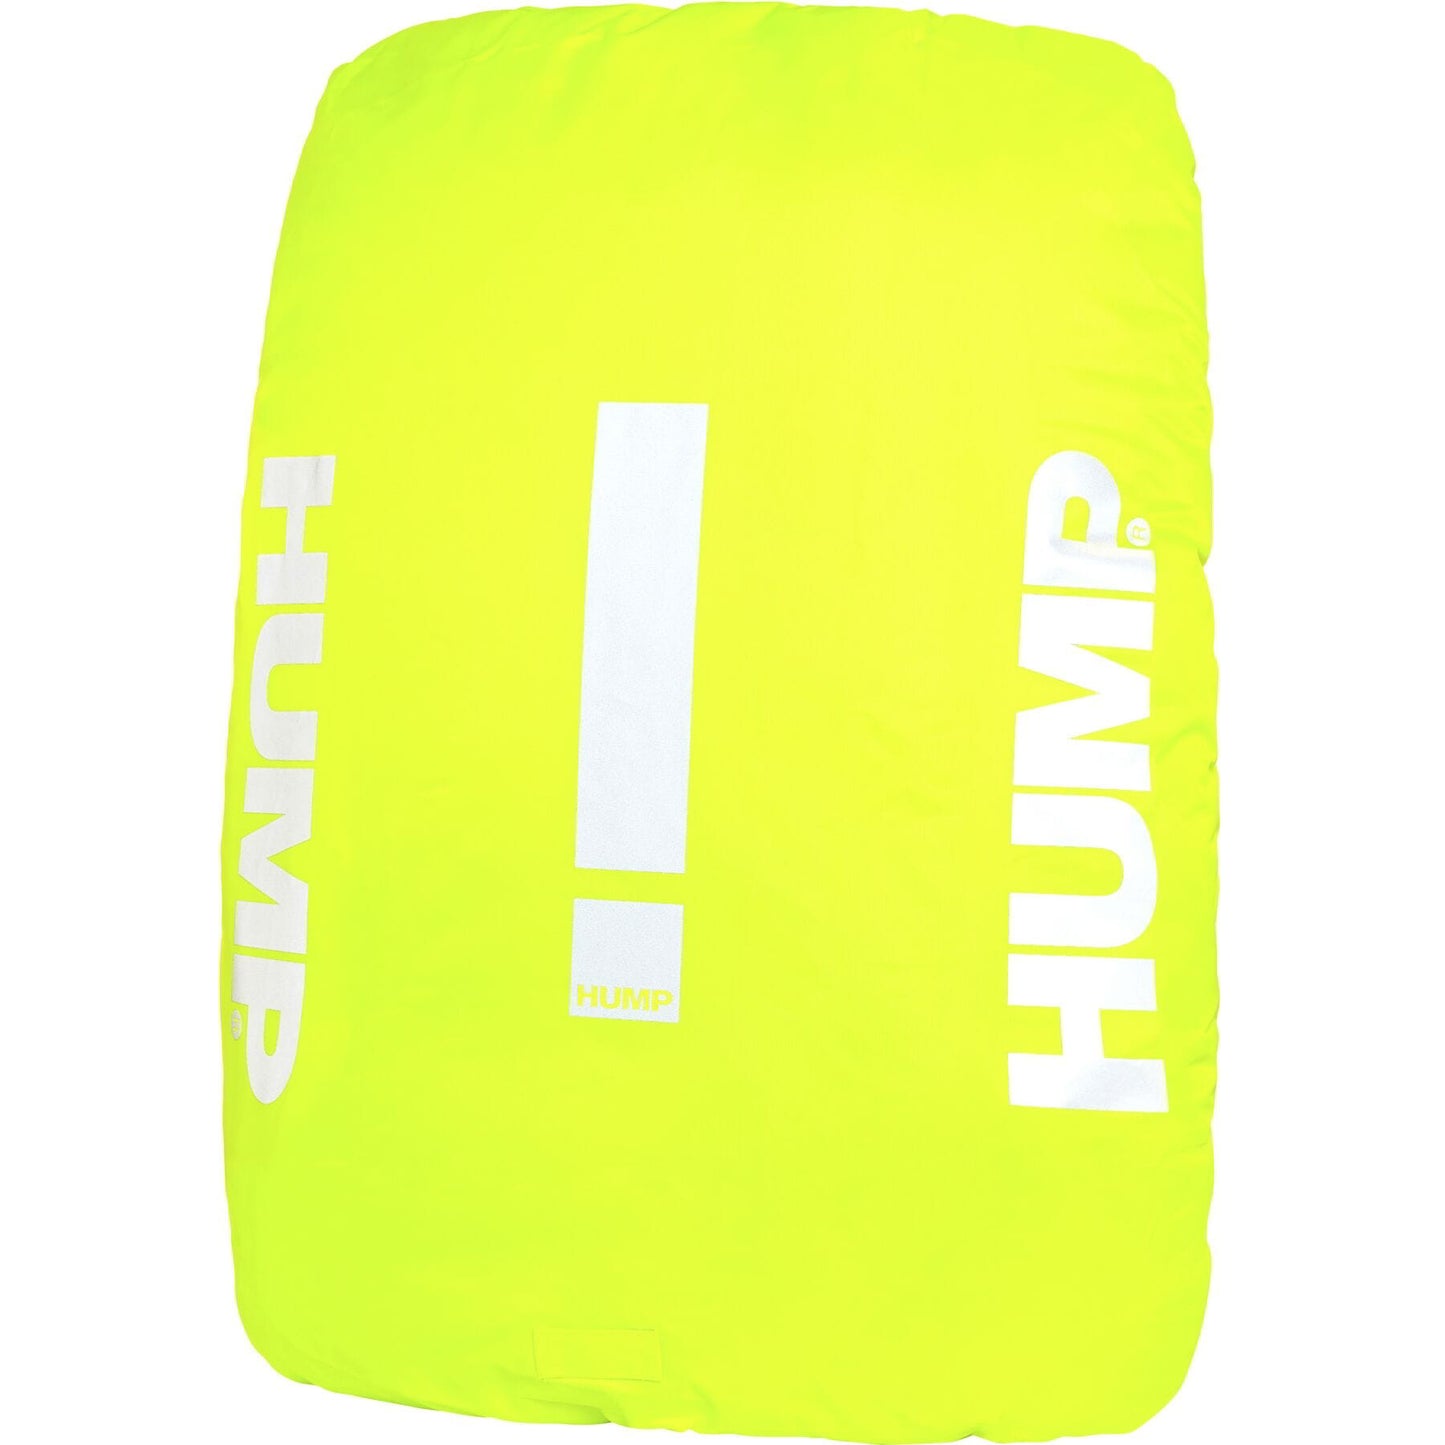 HUMP ORIGINAL WATERPROOF BACKPACK COVER - SAFETY YELLOW